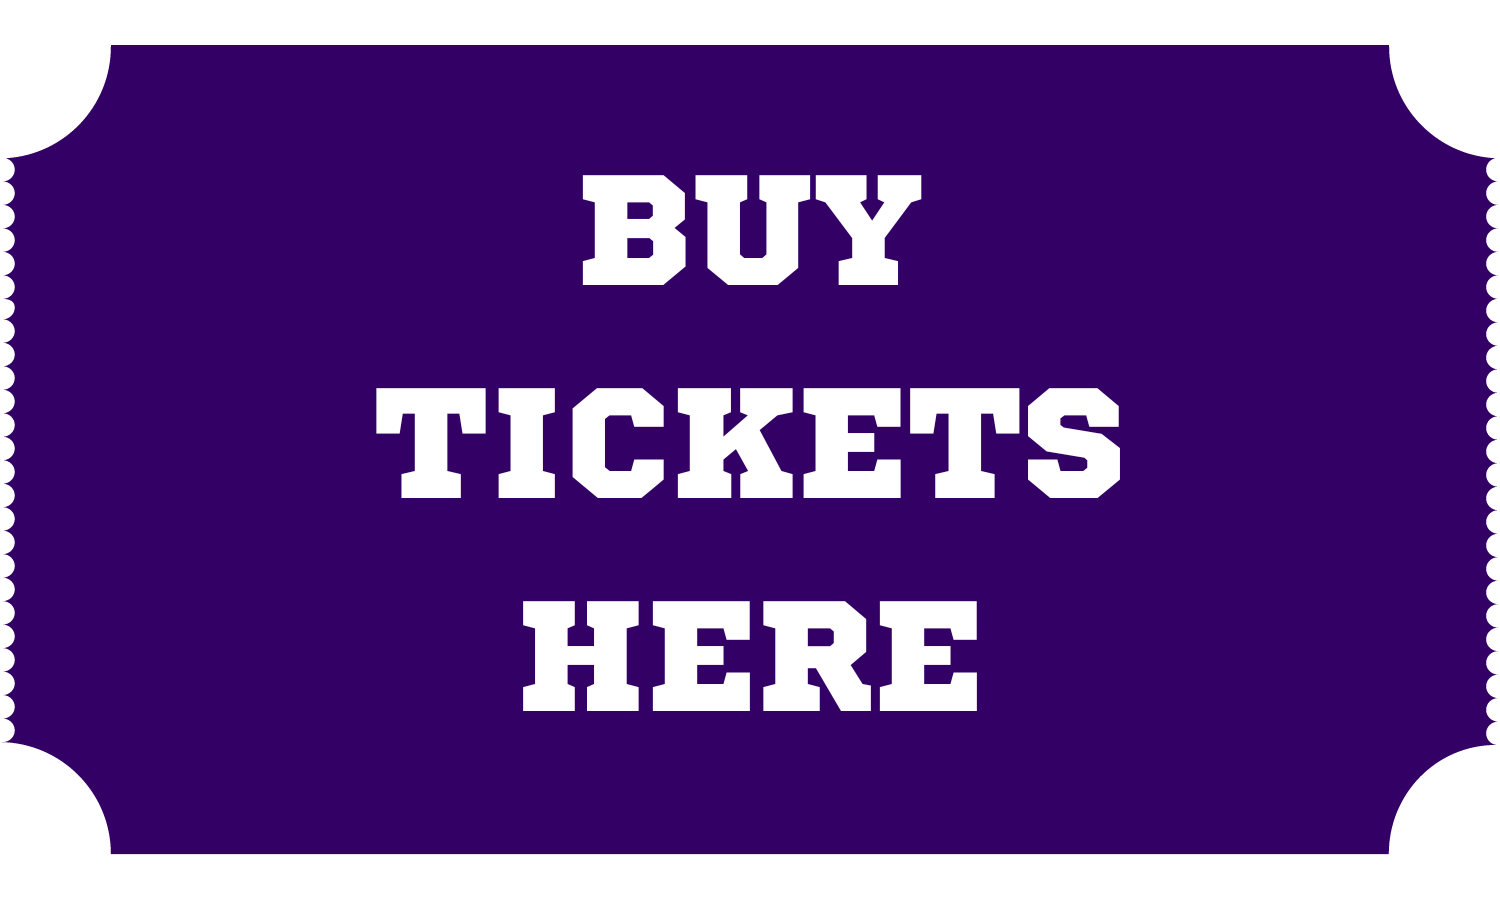 Graphic of a ticket with the text "Buy Tickets Here"